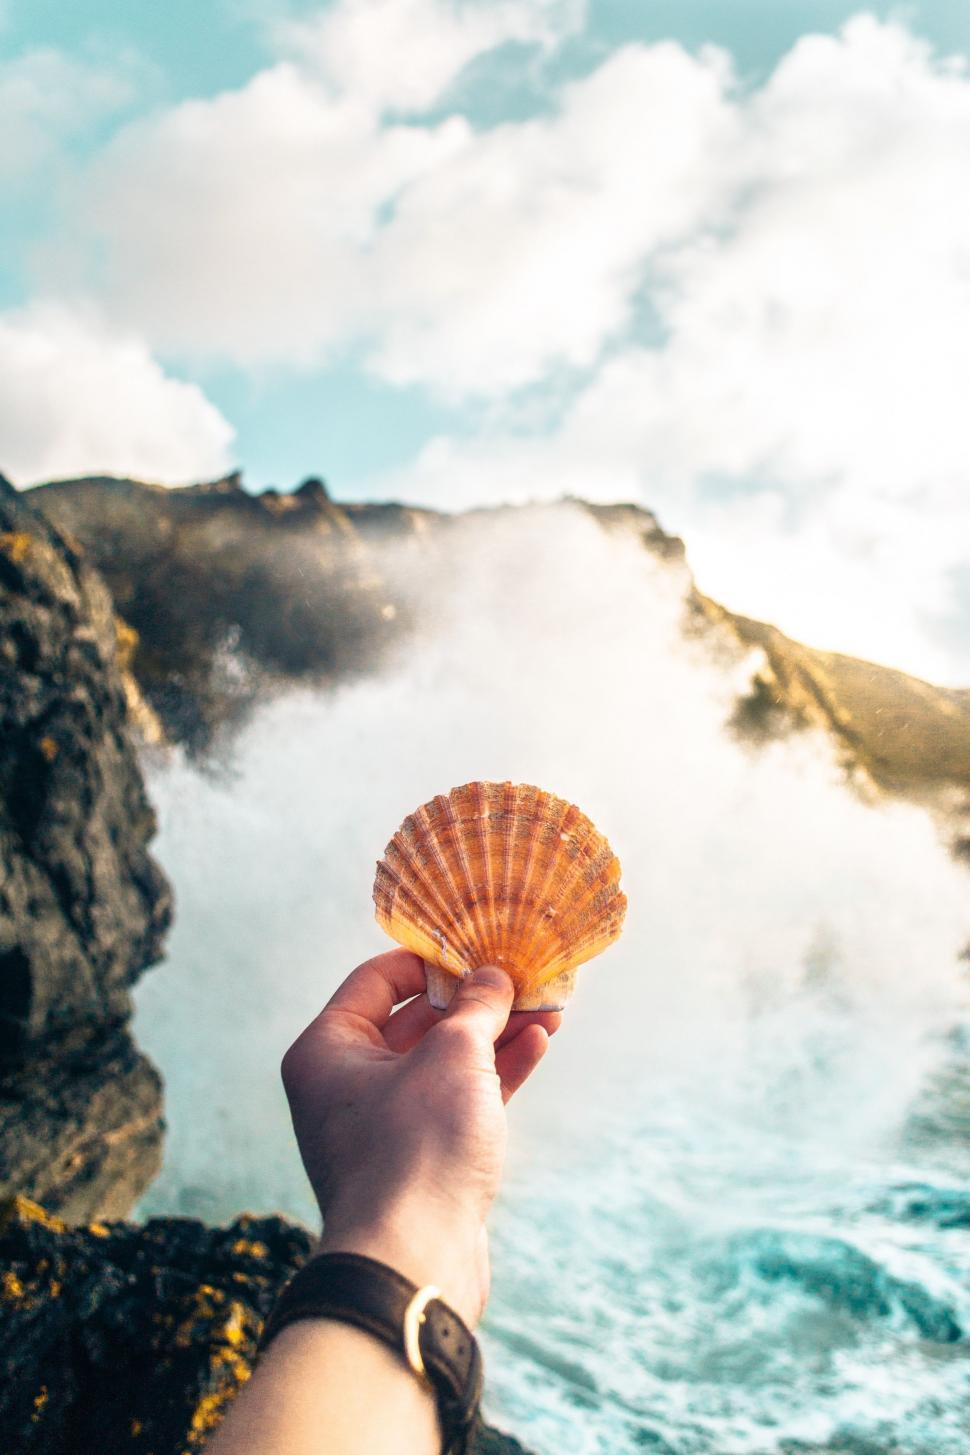 Free Image of Person Holding Seashell in Front of Wave 